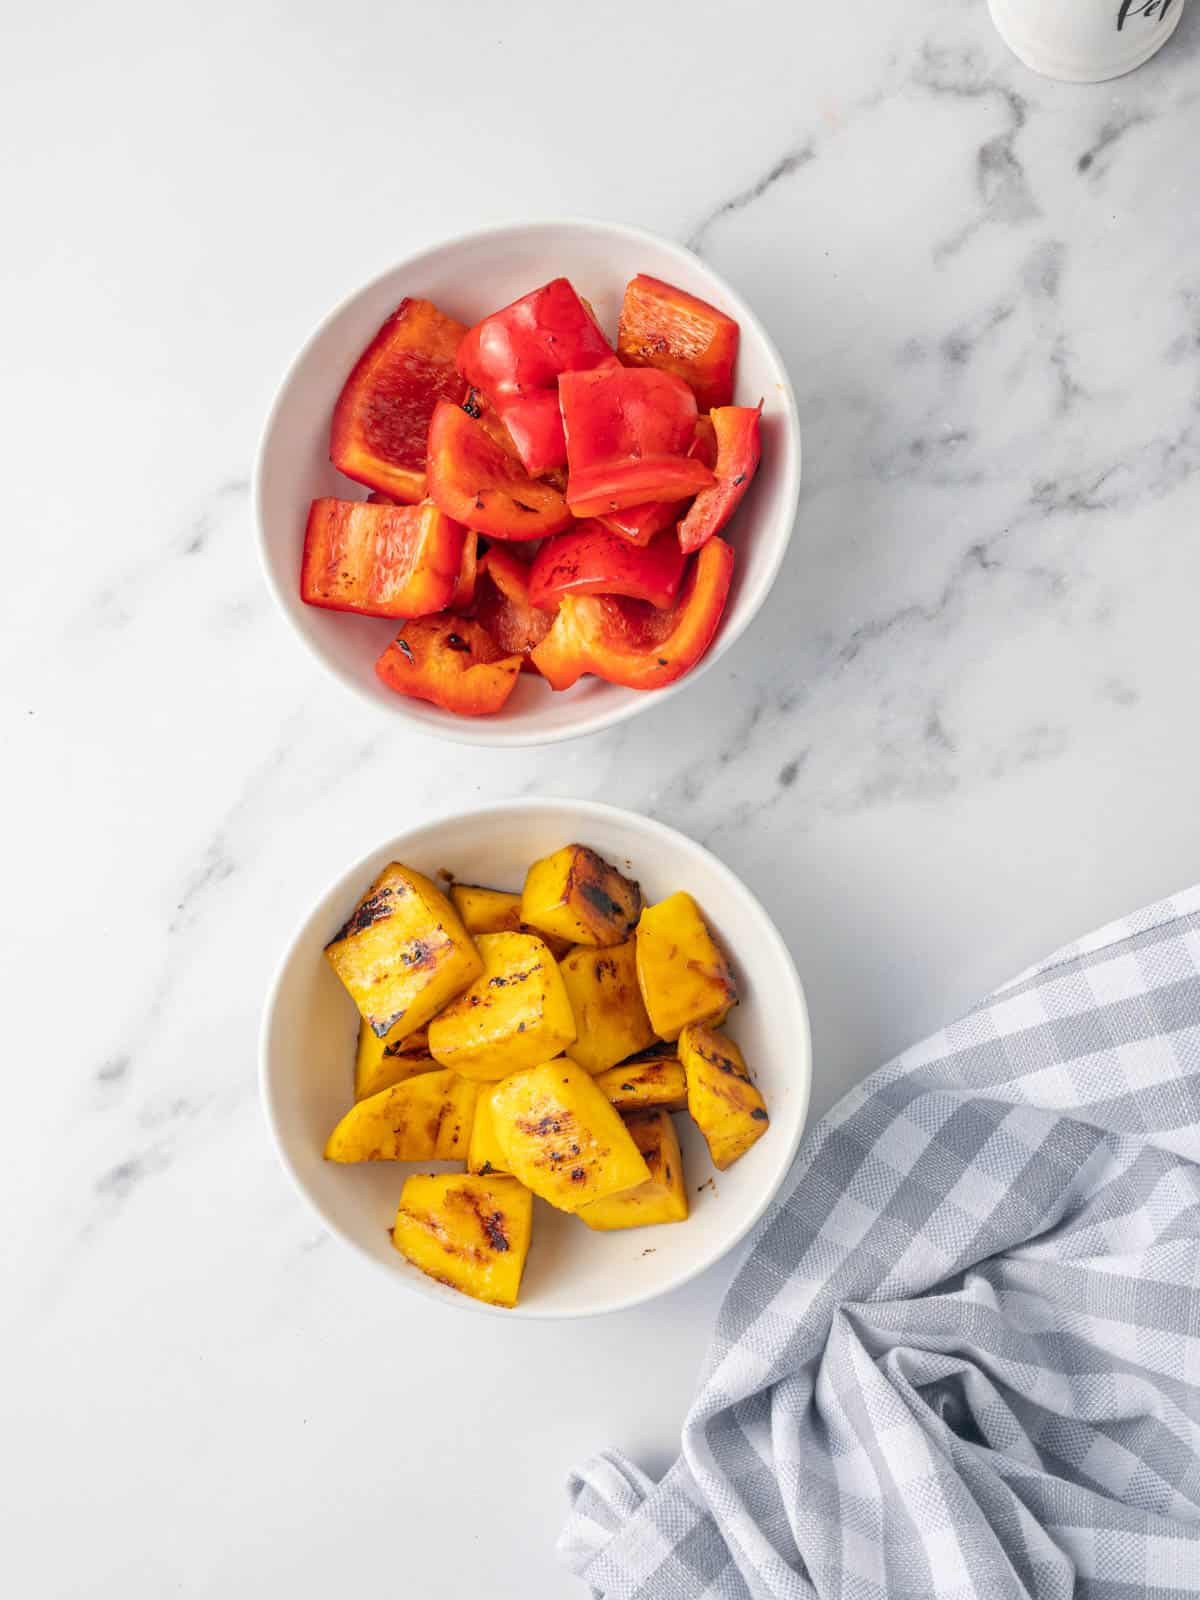 Bowls of sauteed red bell peppers and mango chunks.